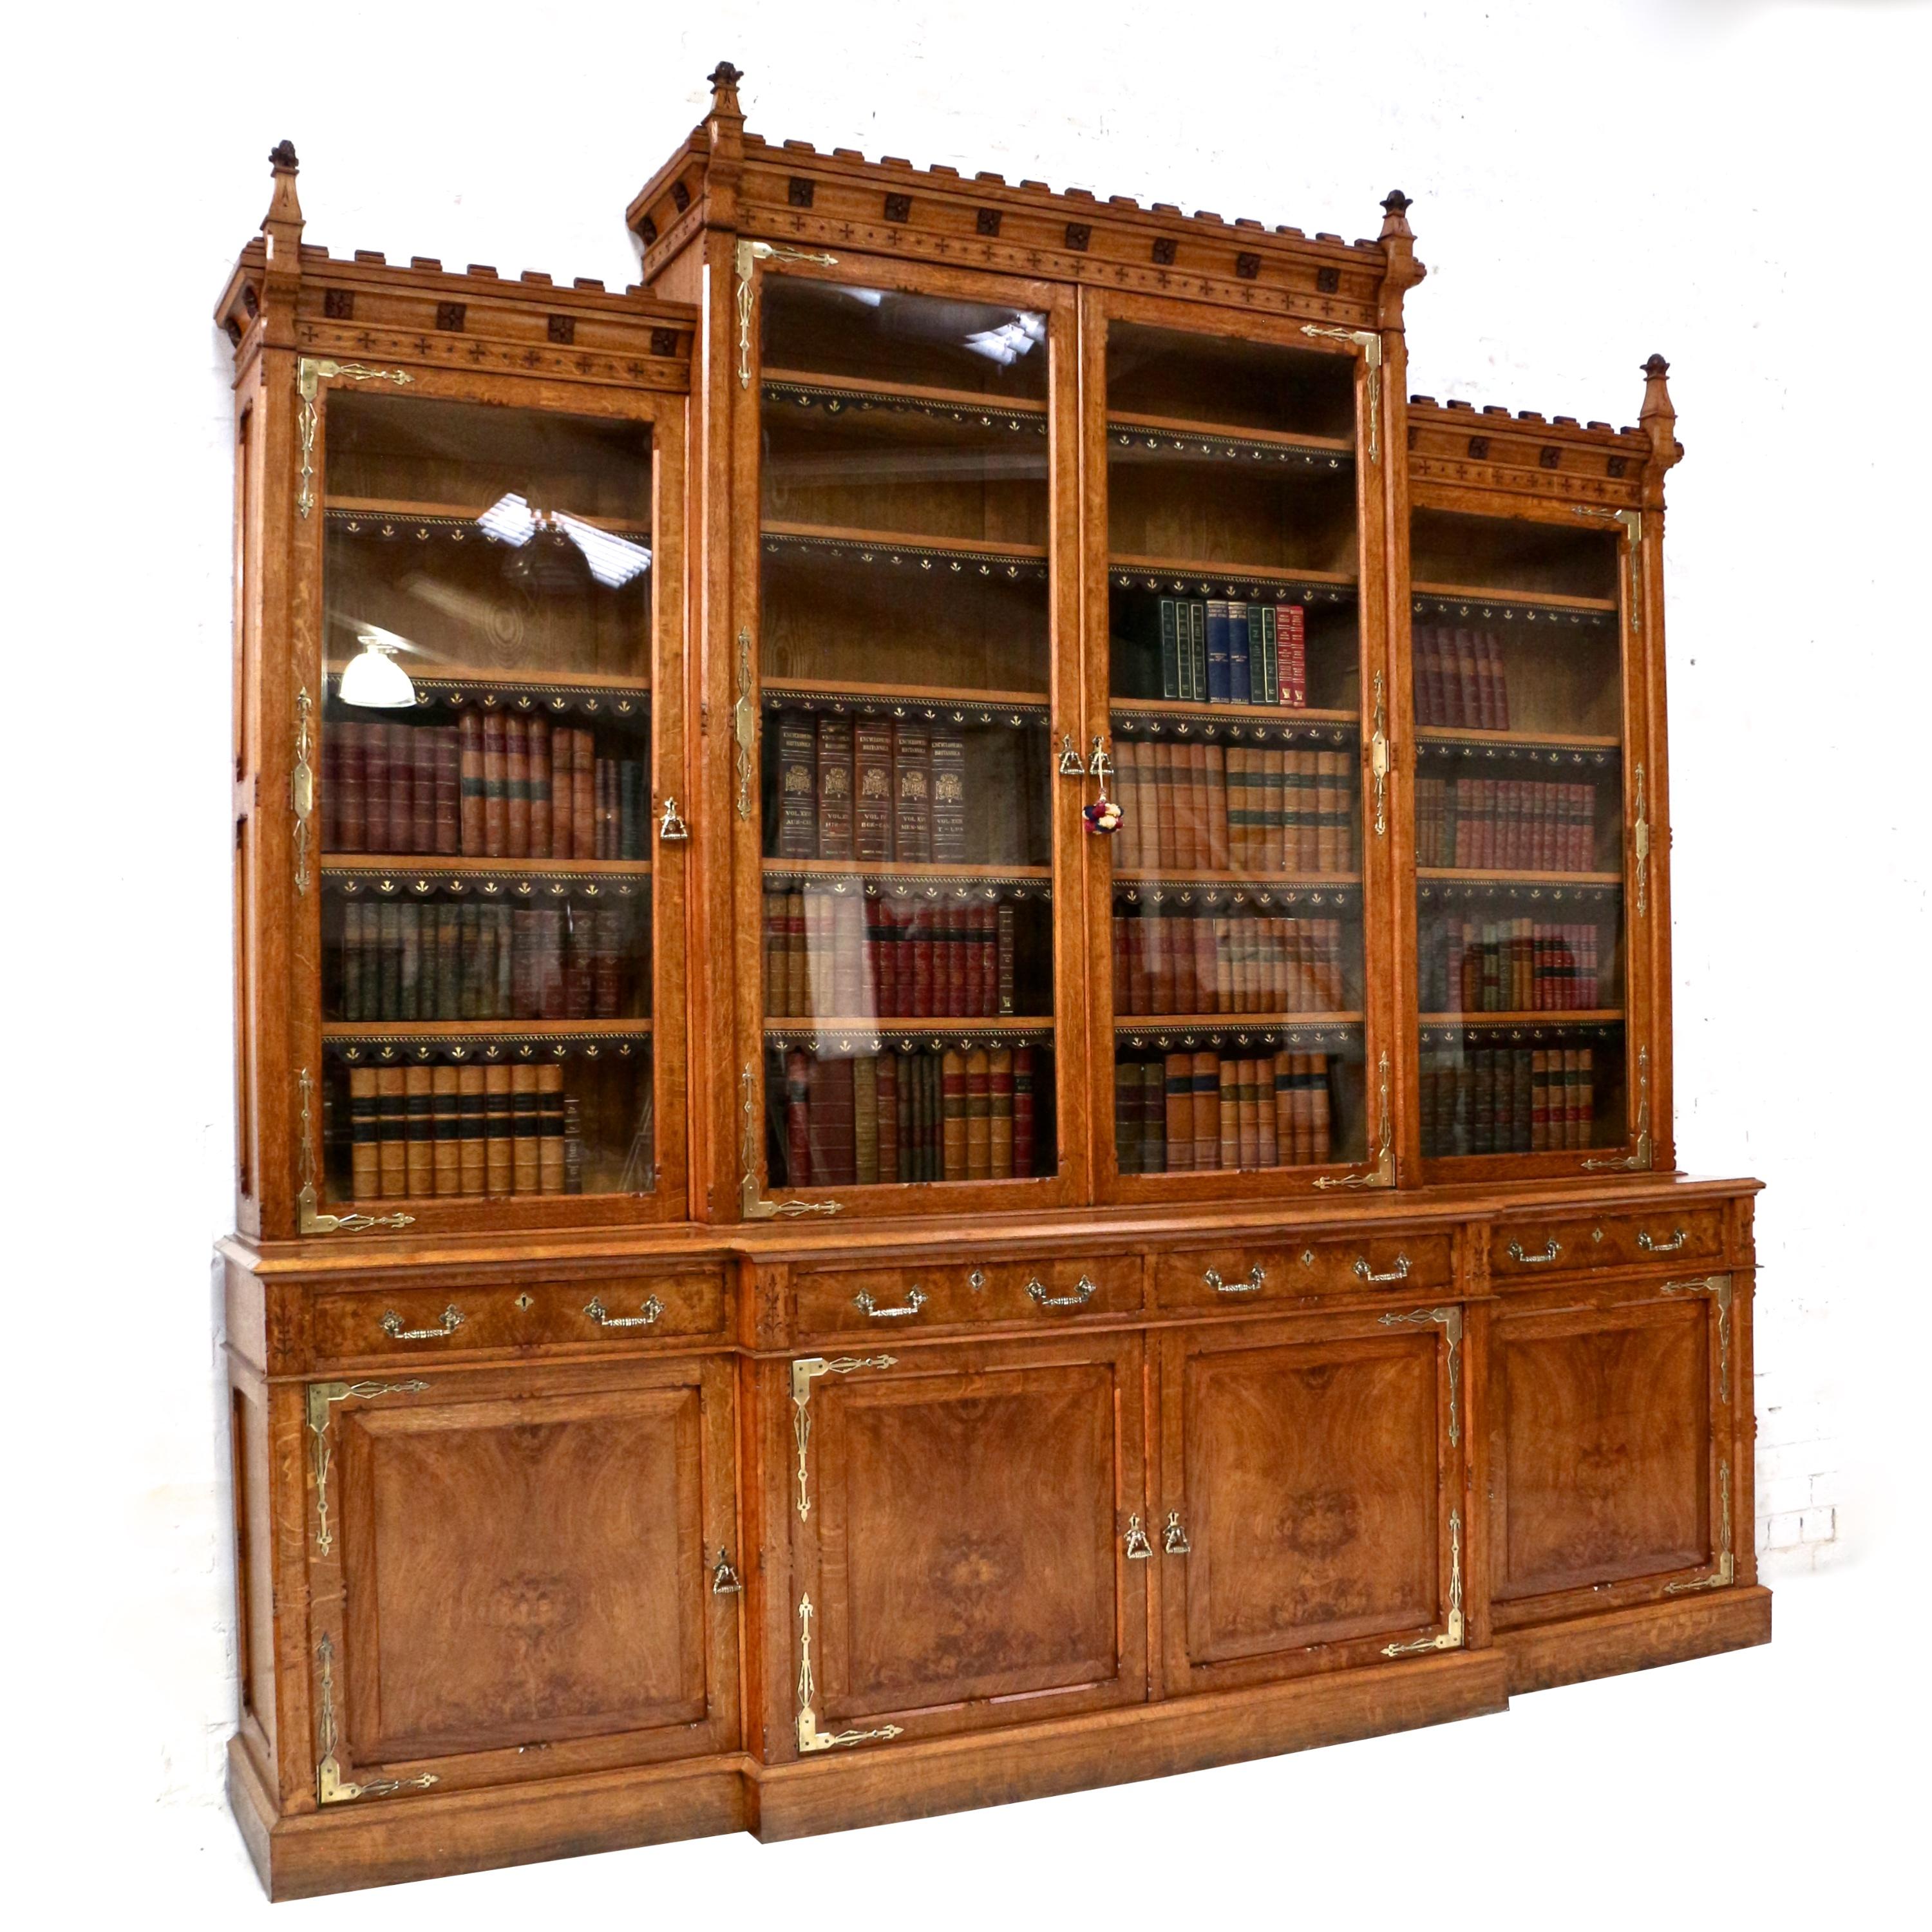 An impressive Gothic Revival oak and pollard oak four door breakfront bookcase in the Pugin style and attributed to Gillows of Lancaster. Dating to circa 1860 this superb library bookcase features a stepped castellated cornice with tapering stylised